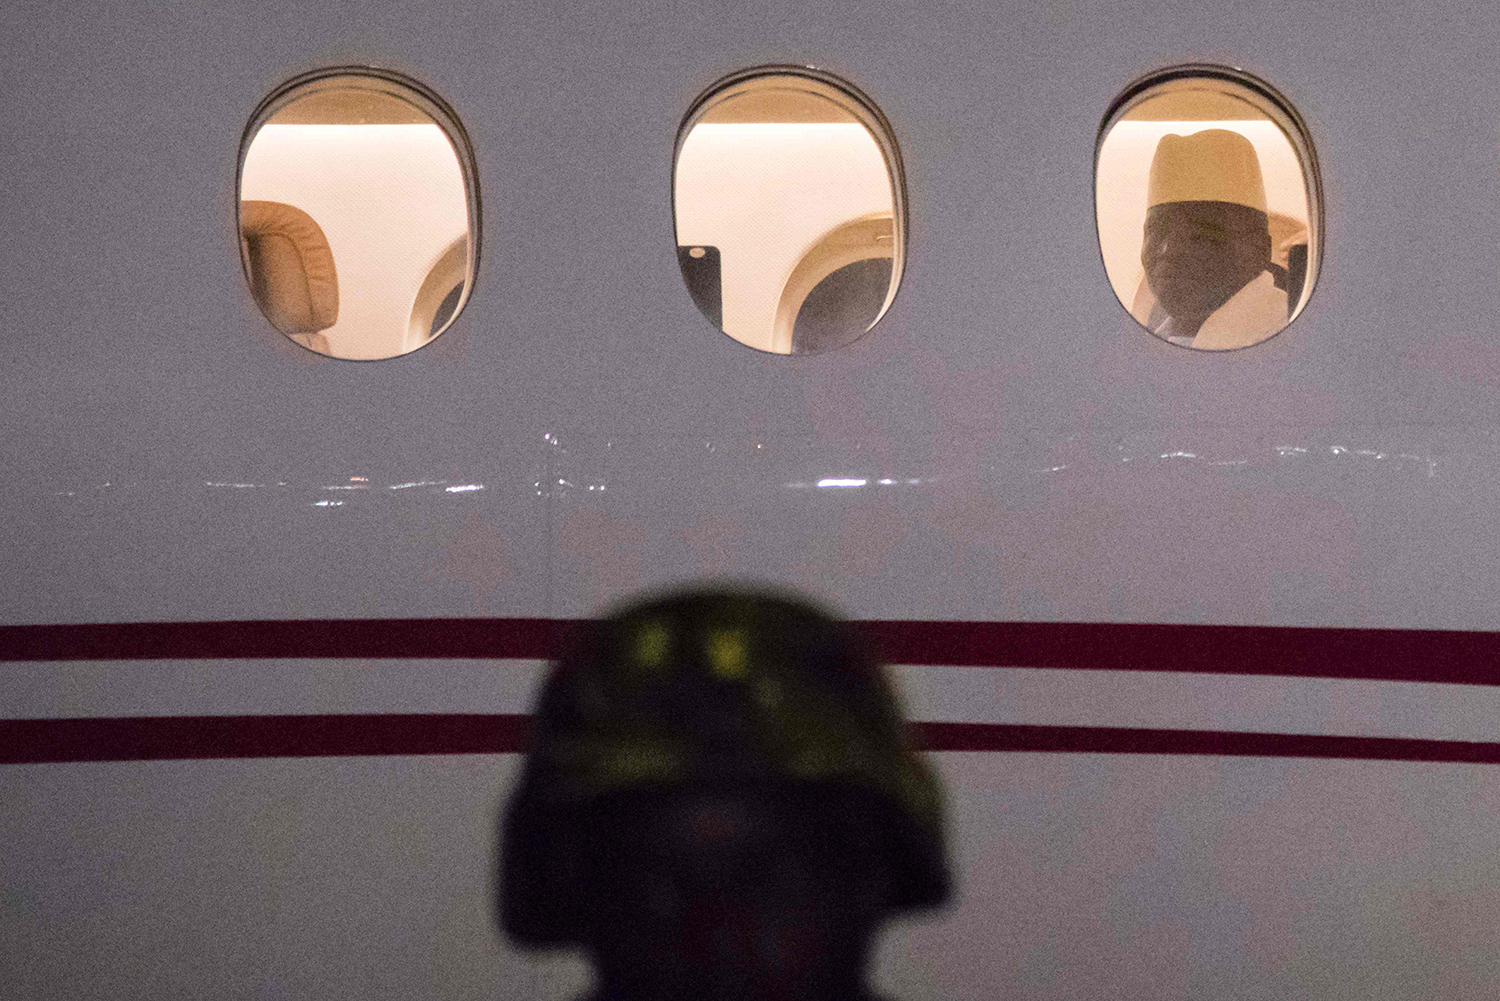 TOPSHOT - Former president Yaya Jammeh the Gambia's leader for 22 years, looks through the window from the plane as he leaves the country on 21 January 2017 in Banjul airport. Yahya Jammeh, the Gambia's leader for 22 years, flew out of the country on January 21, 2017 after declaring he would step down and hand power to President Adama Barrow, ending a political crisis. An AFP journalist at the airport saw Jammeh board an unmarked plane heading for an unspecified destination, seen off by a delegation of dignitaries and soldiers. / AFP PHOTO / STRINGER / TT / kod 444